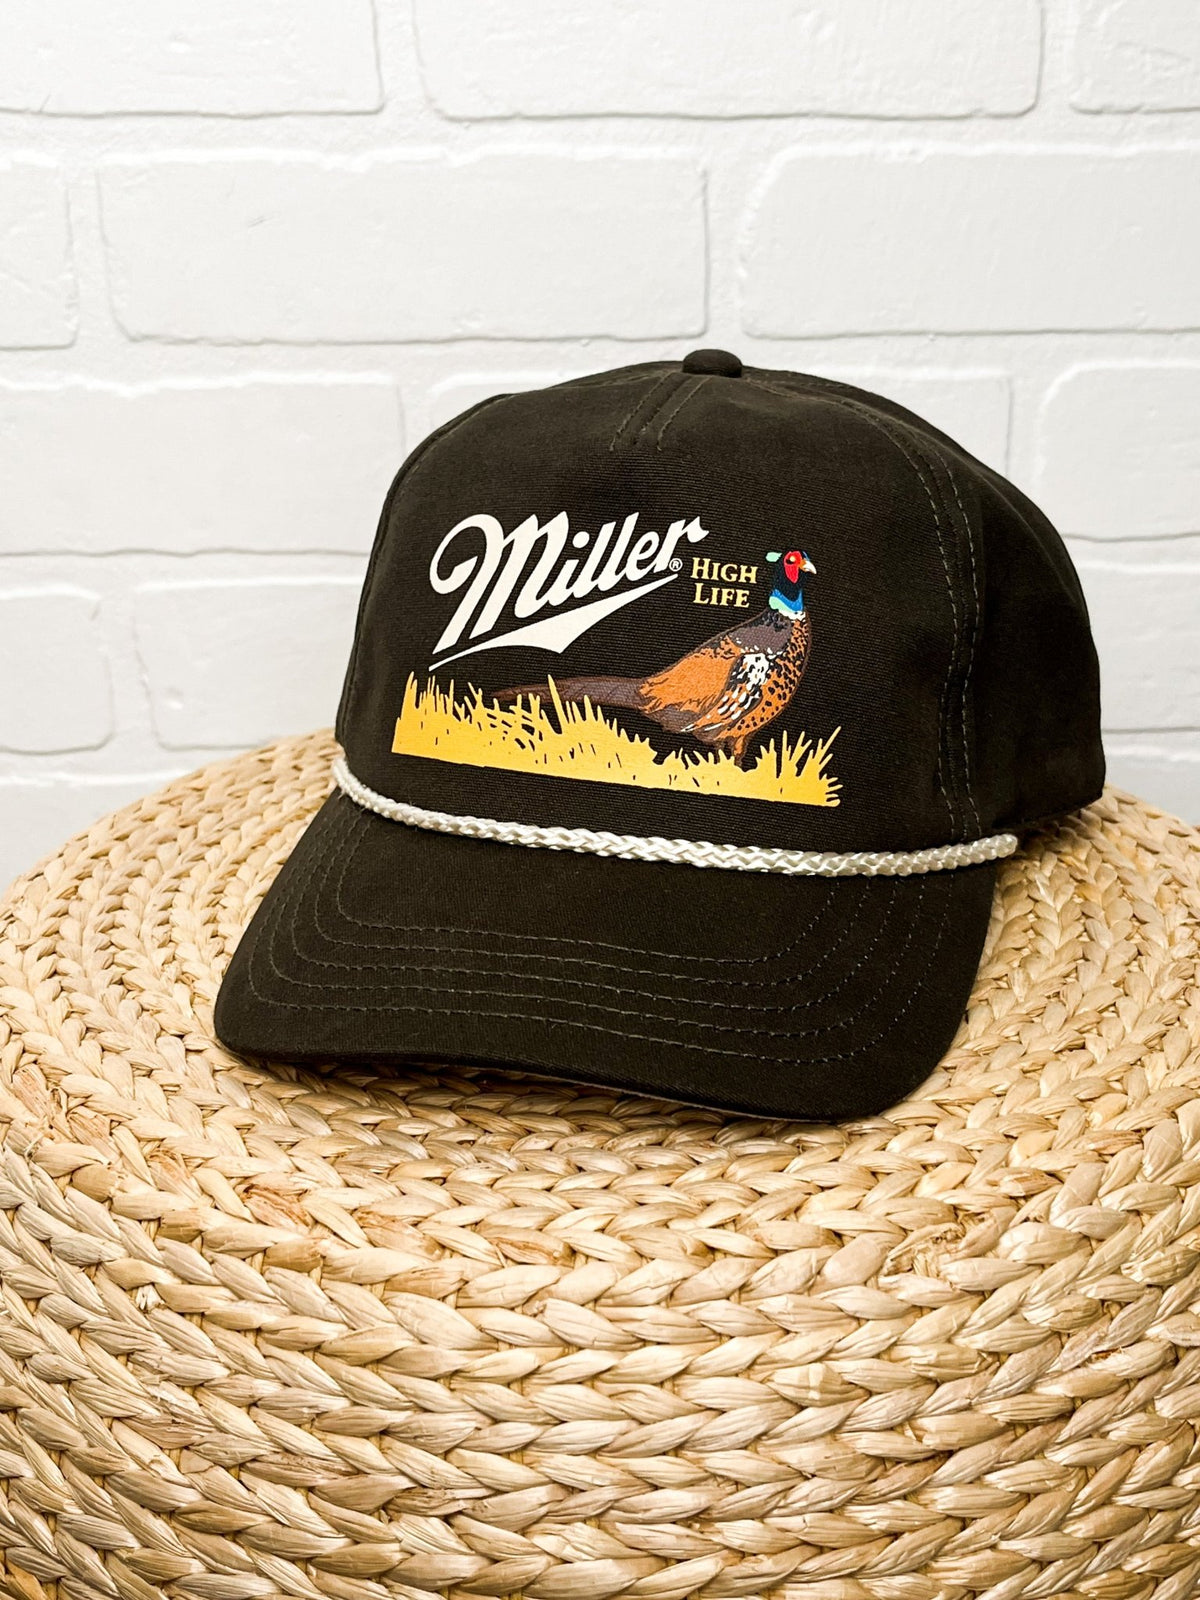 Miller high life canvas hat army - Trendy Gifts at Lush Fashion Lounge Boutique in Oklahoma City